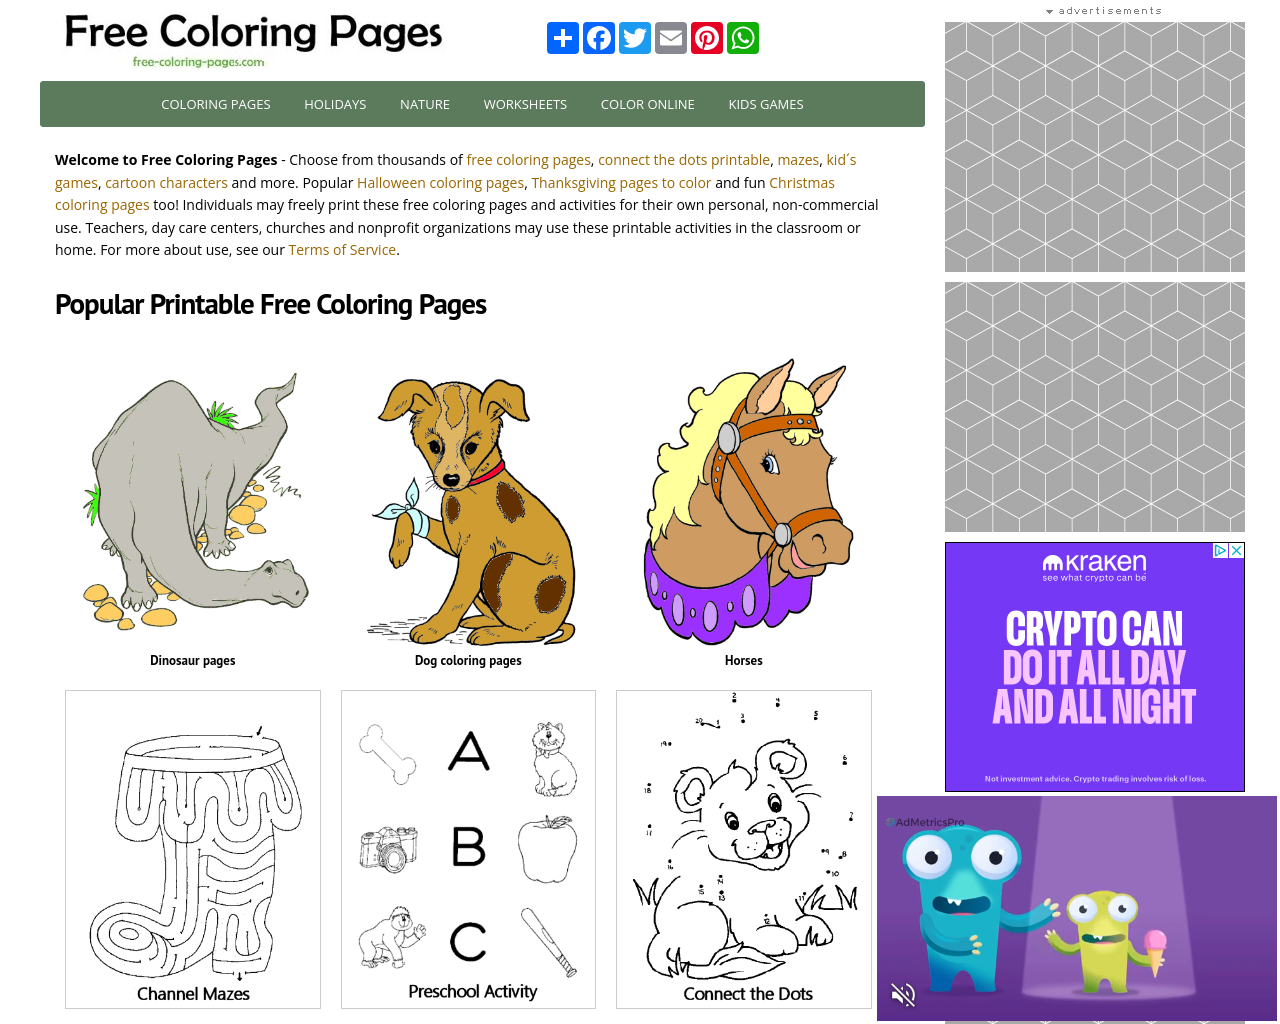 free-coloring-pages.com